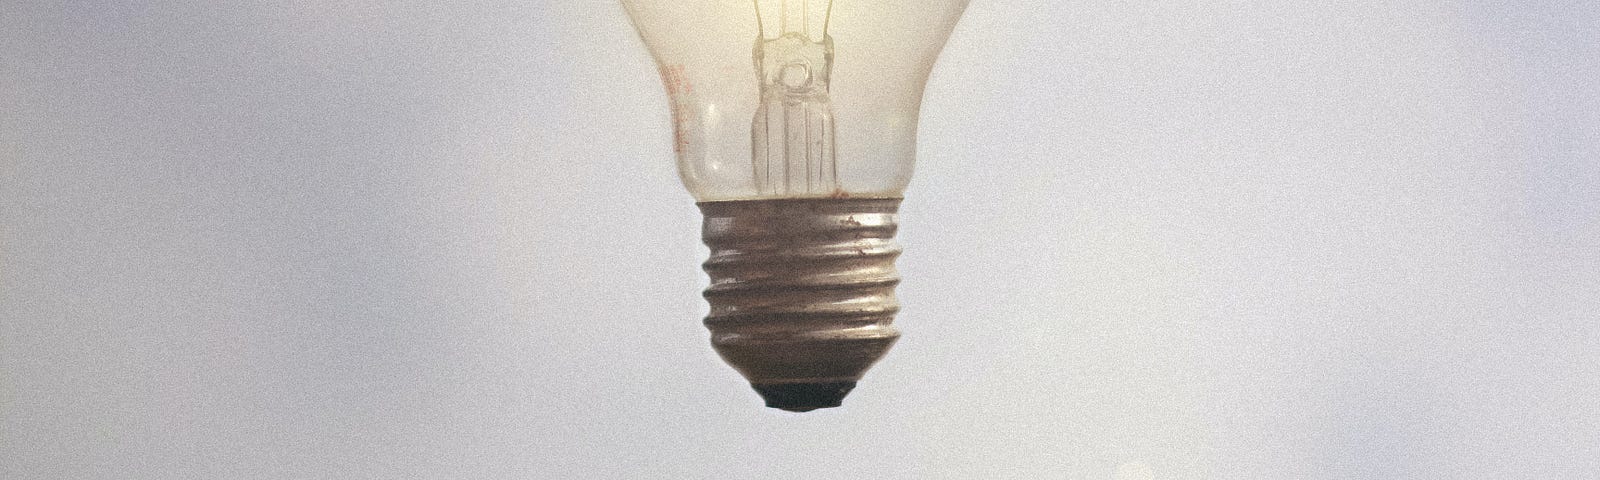 An electric bulb is suspended in the air with spread fingers under the bulb.